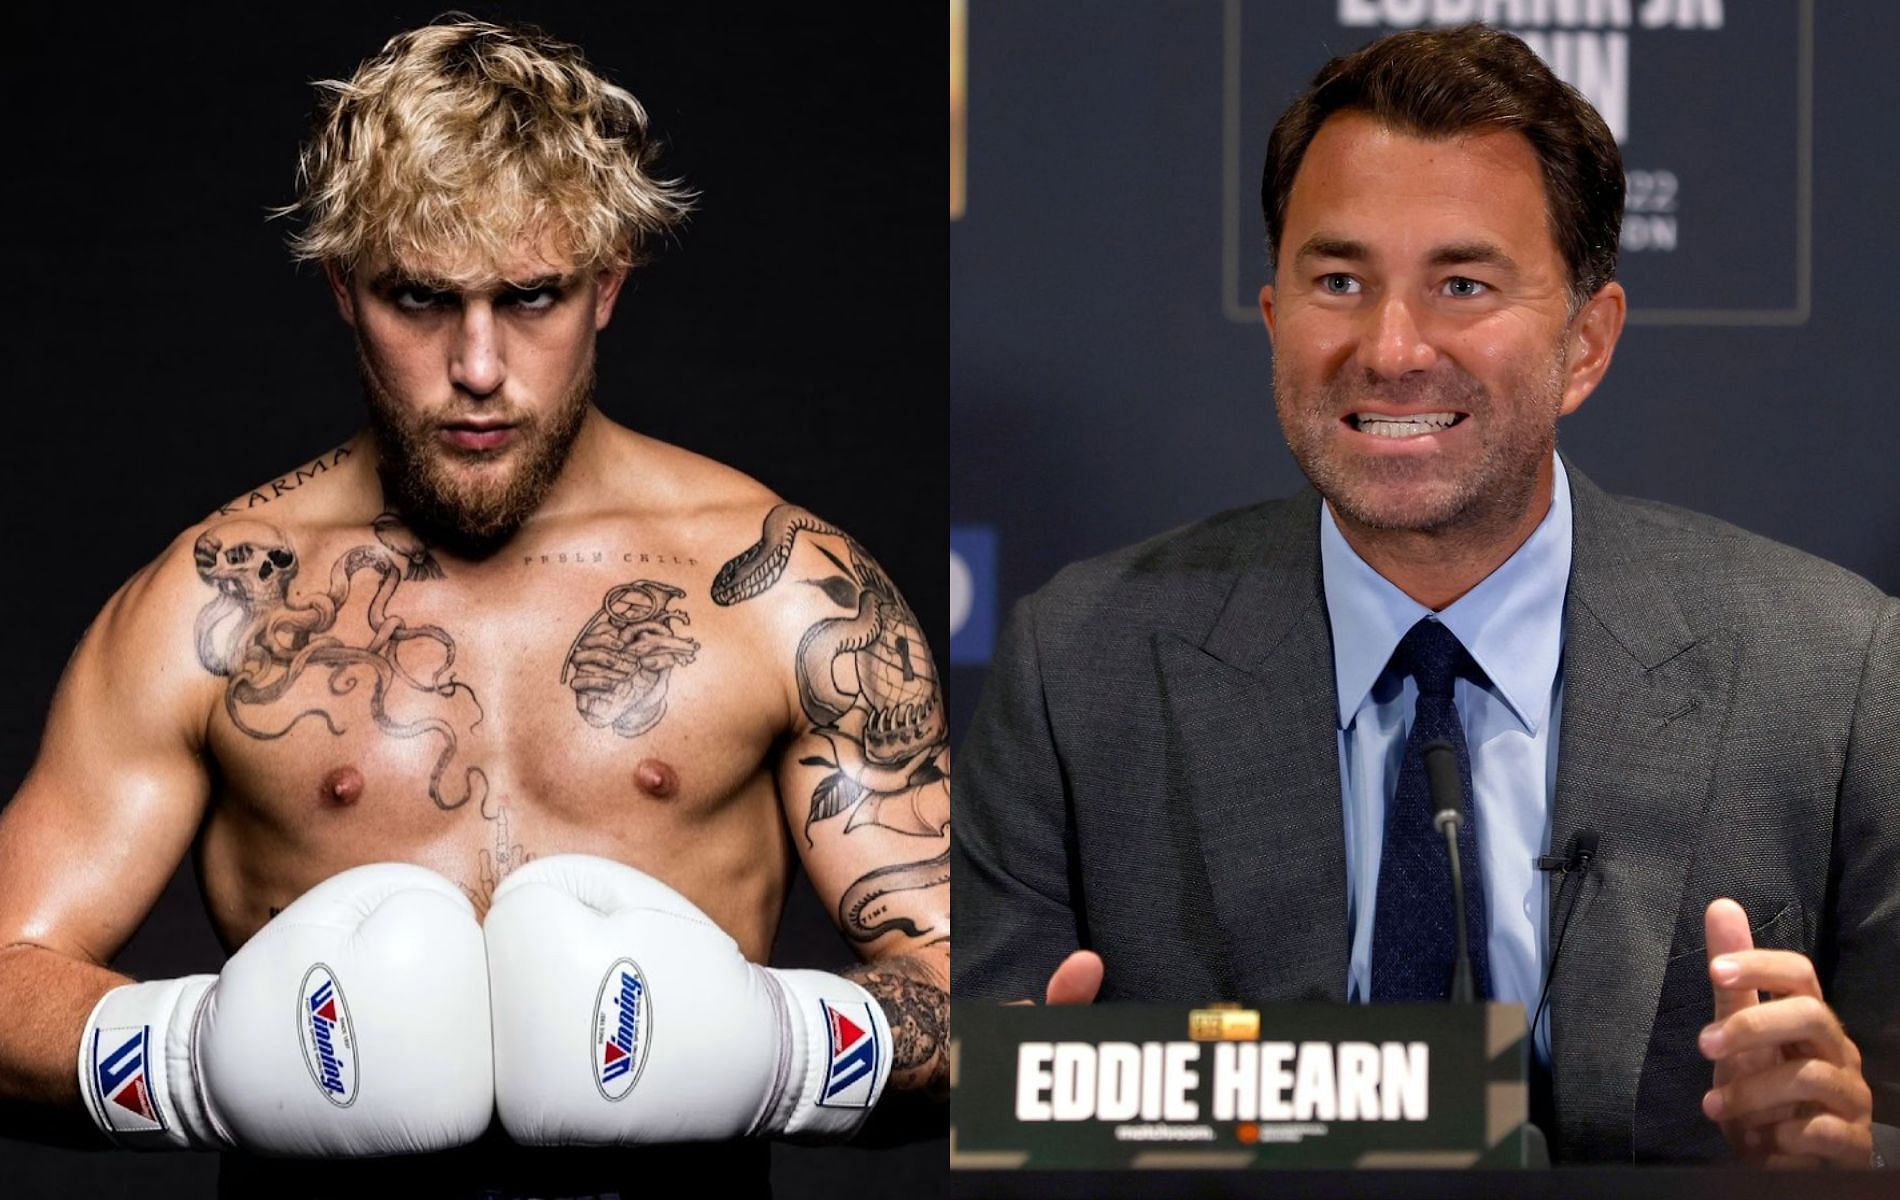 Jake Paul (left) and Eddie Hearn (right)